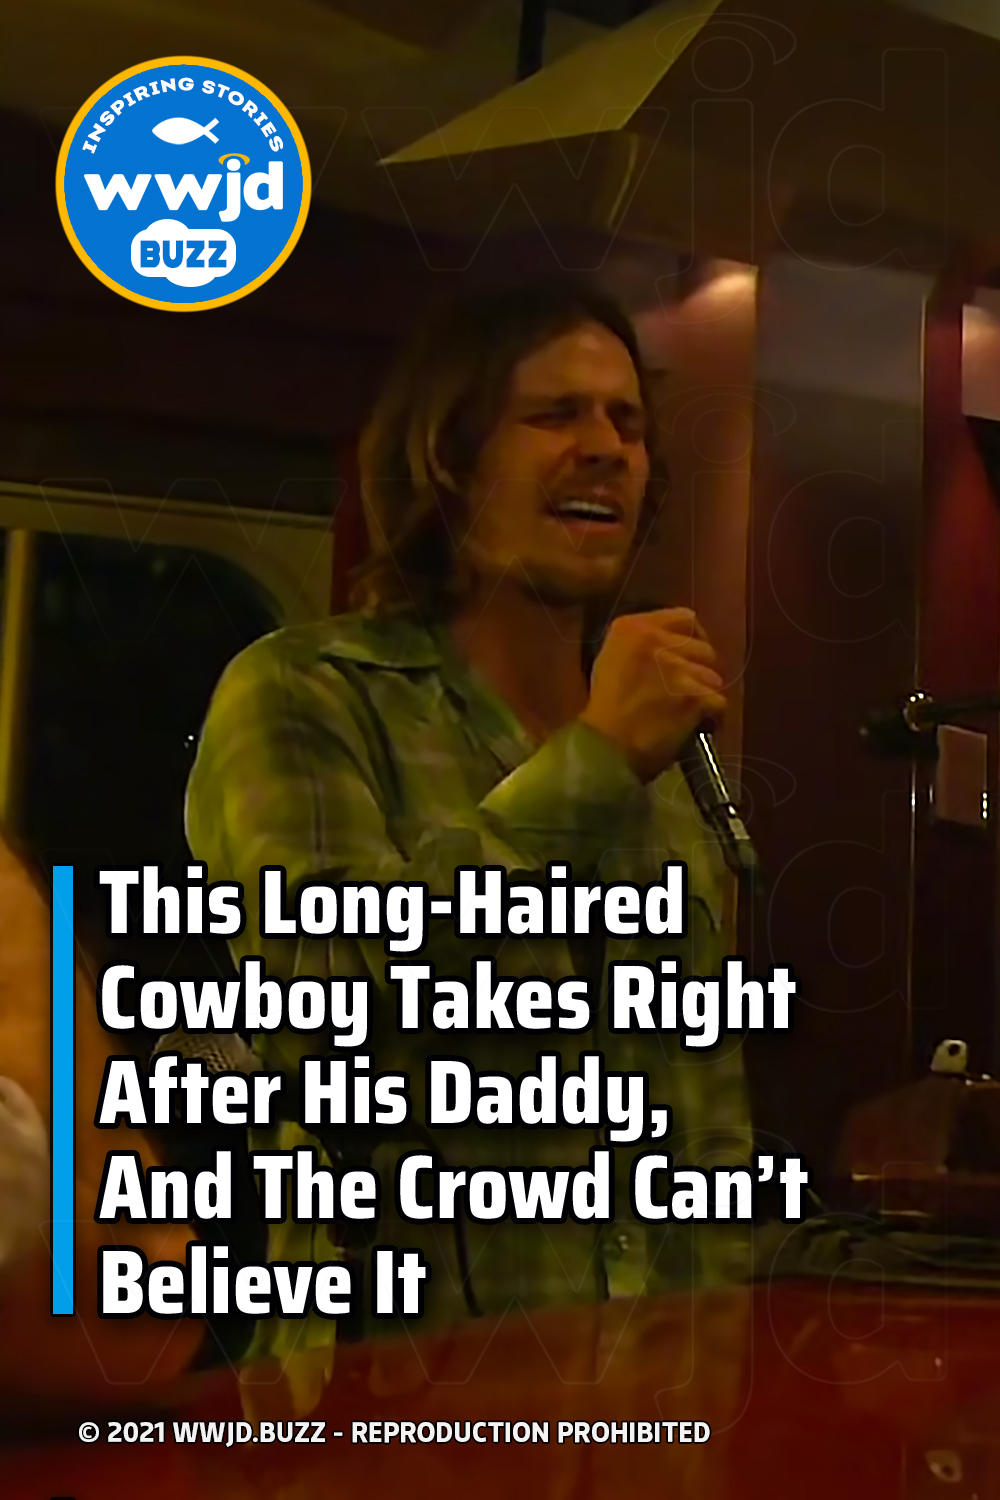 This Long-Haired Cowboy Takes Right After His Daddy, And The Crowd Can’t Believe It